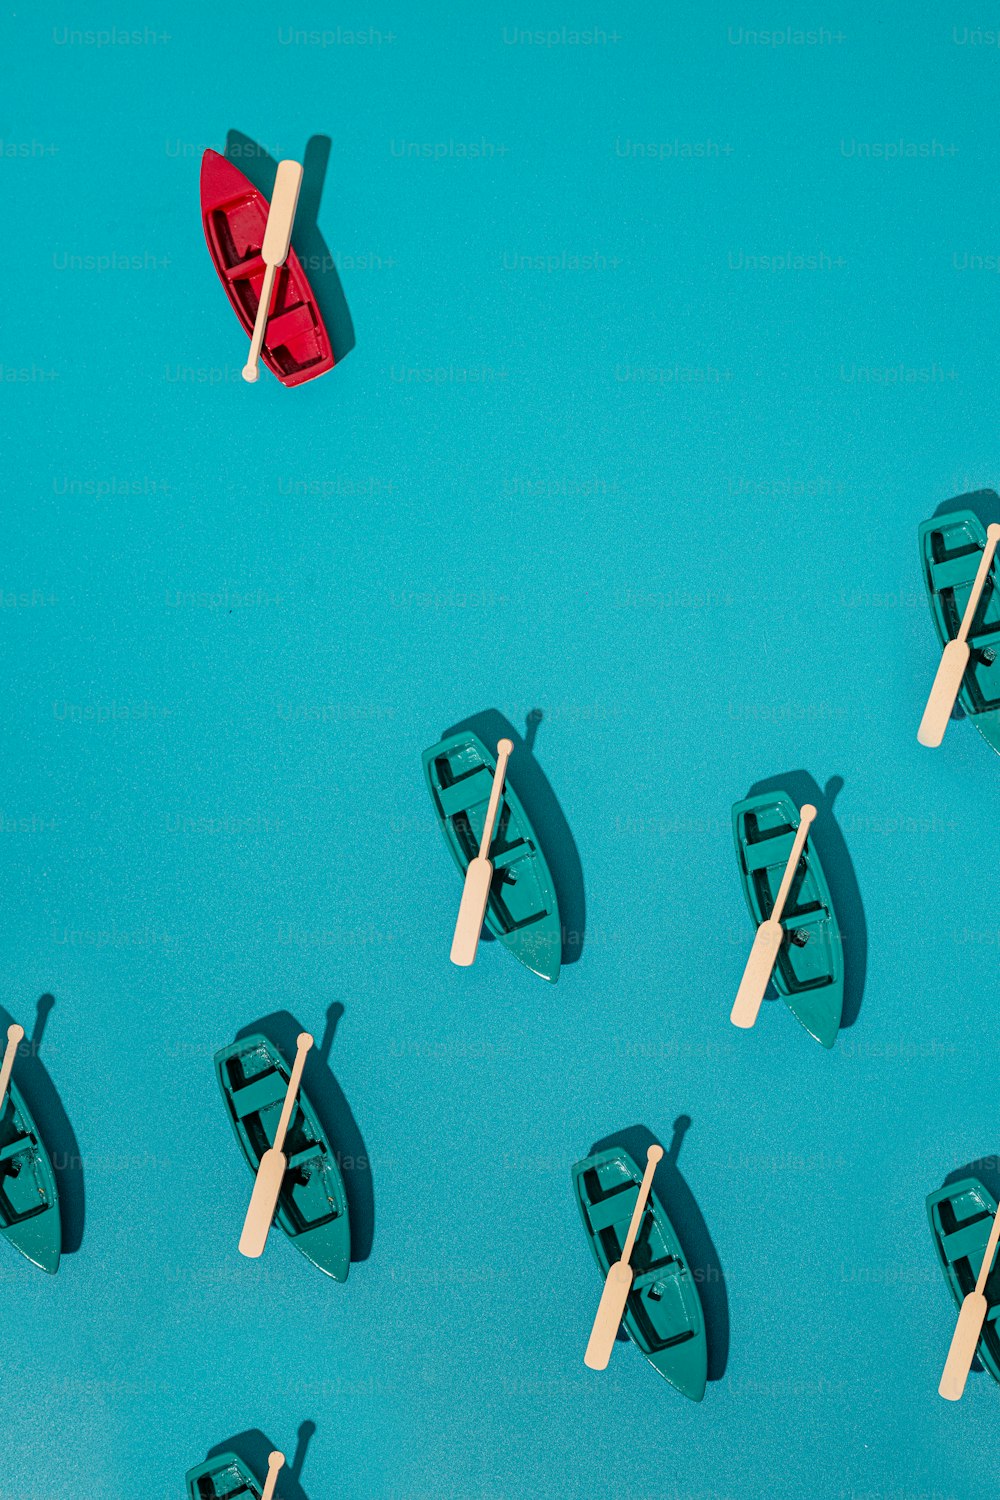 a group of small boats floating on top of a blue surface